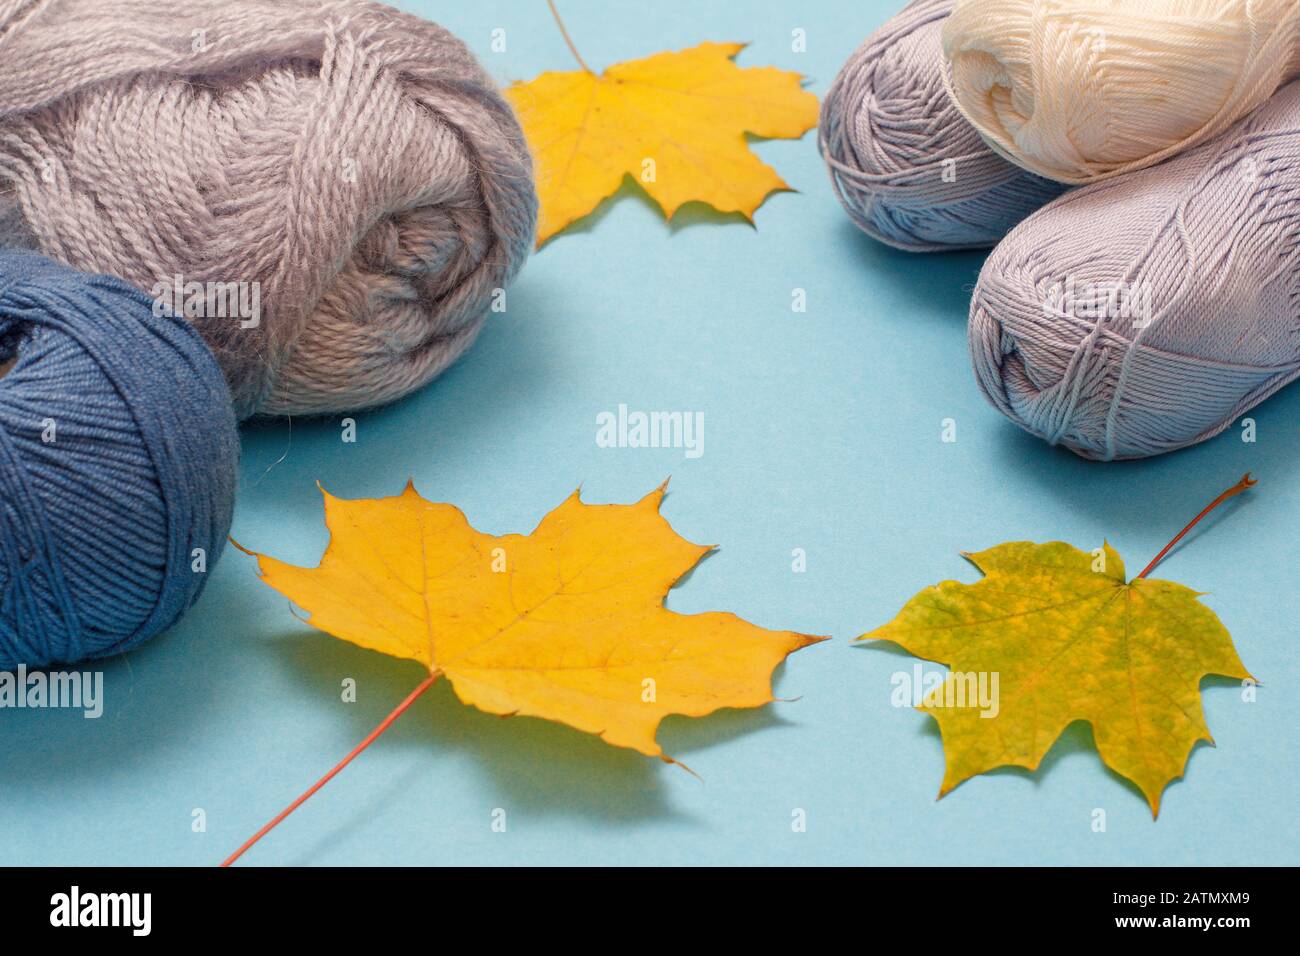 Knitting yarn balls and dry maple leaves on a blue background. Knitting concept. Stock Photo